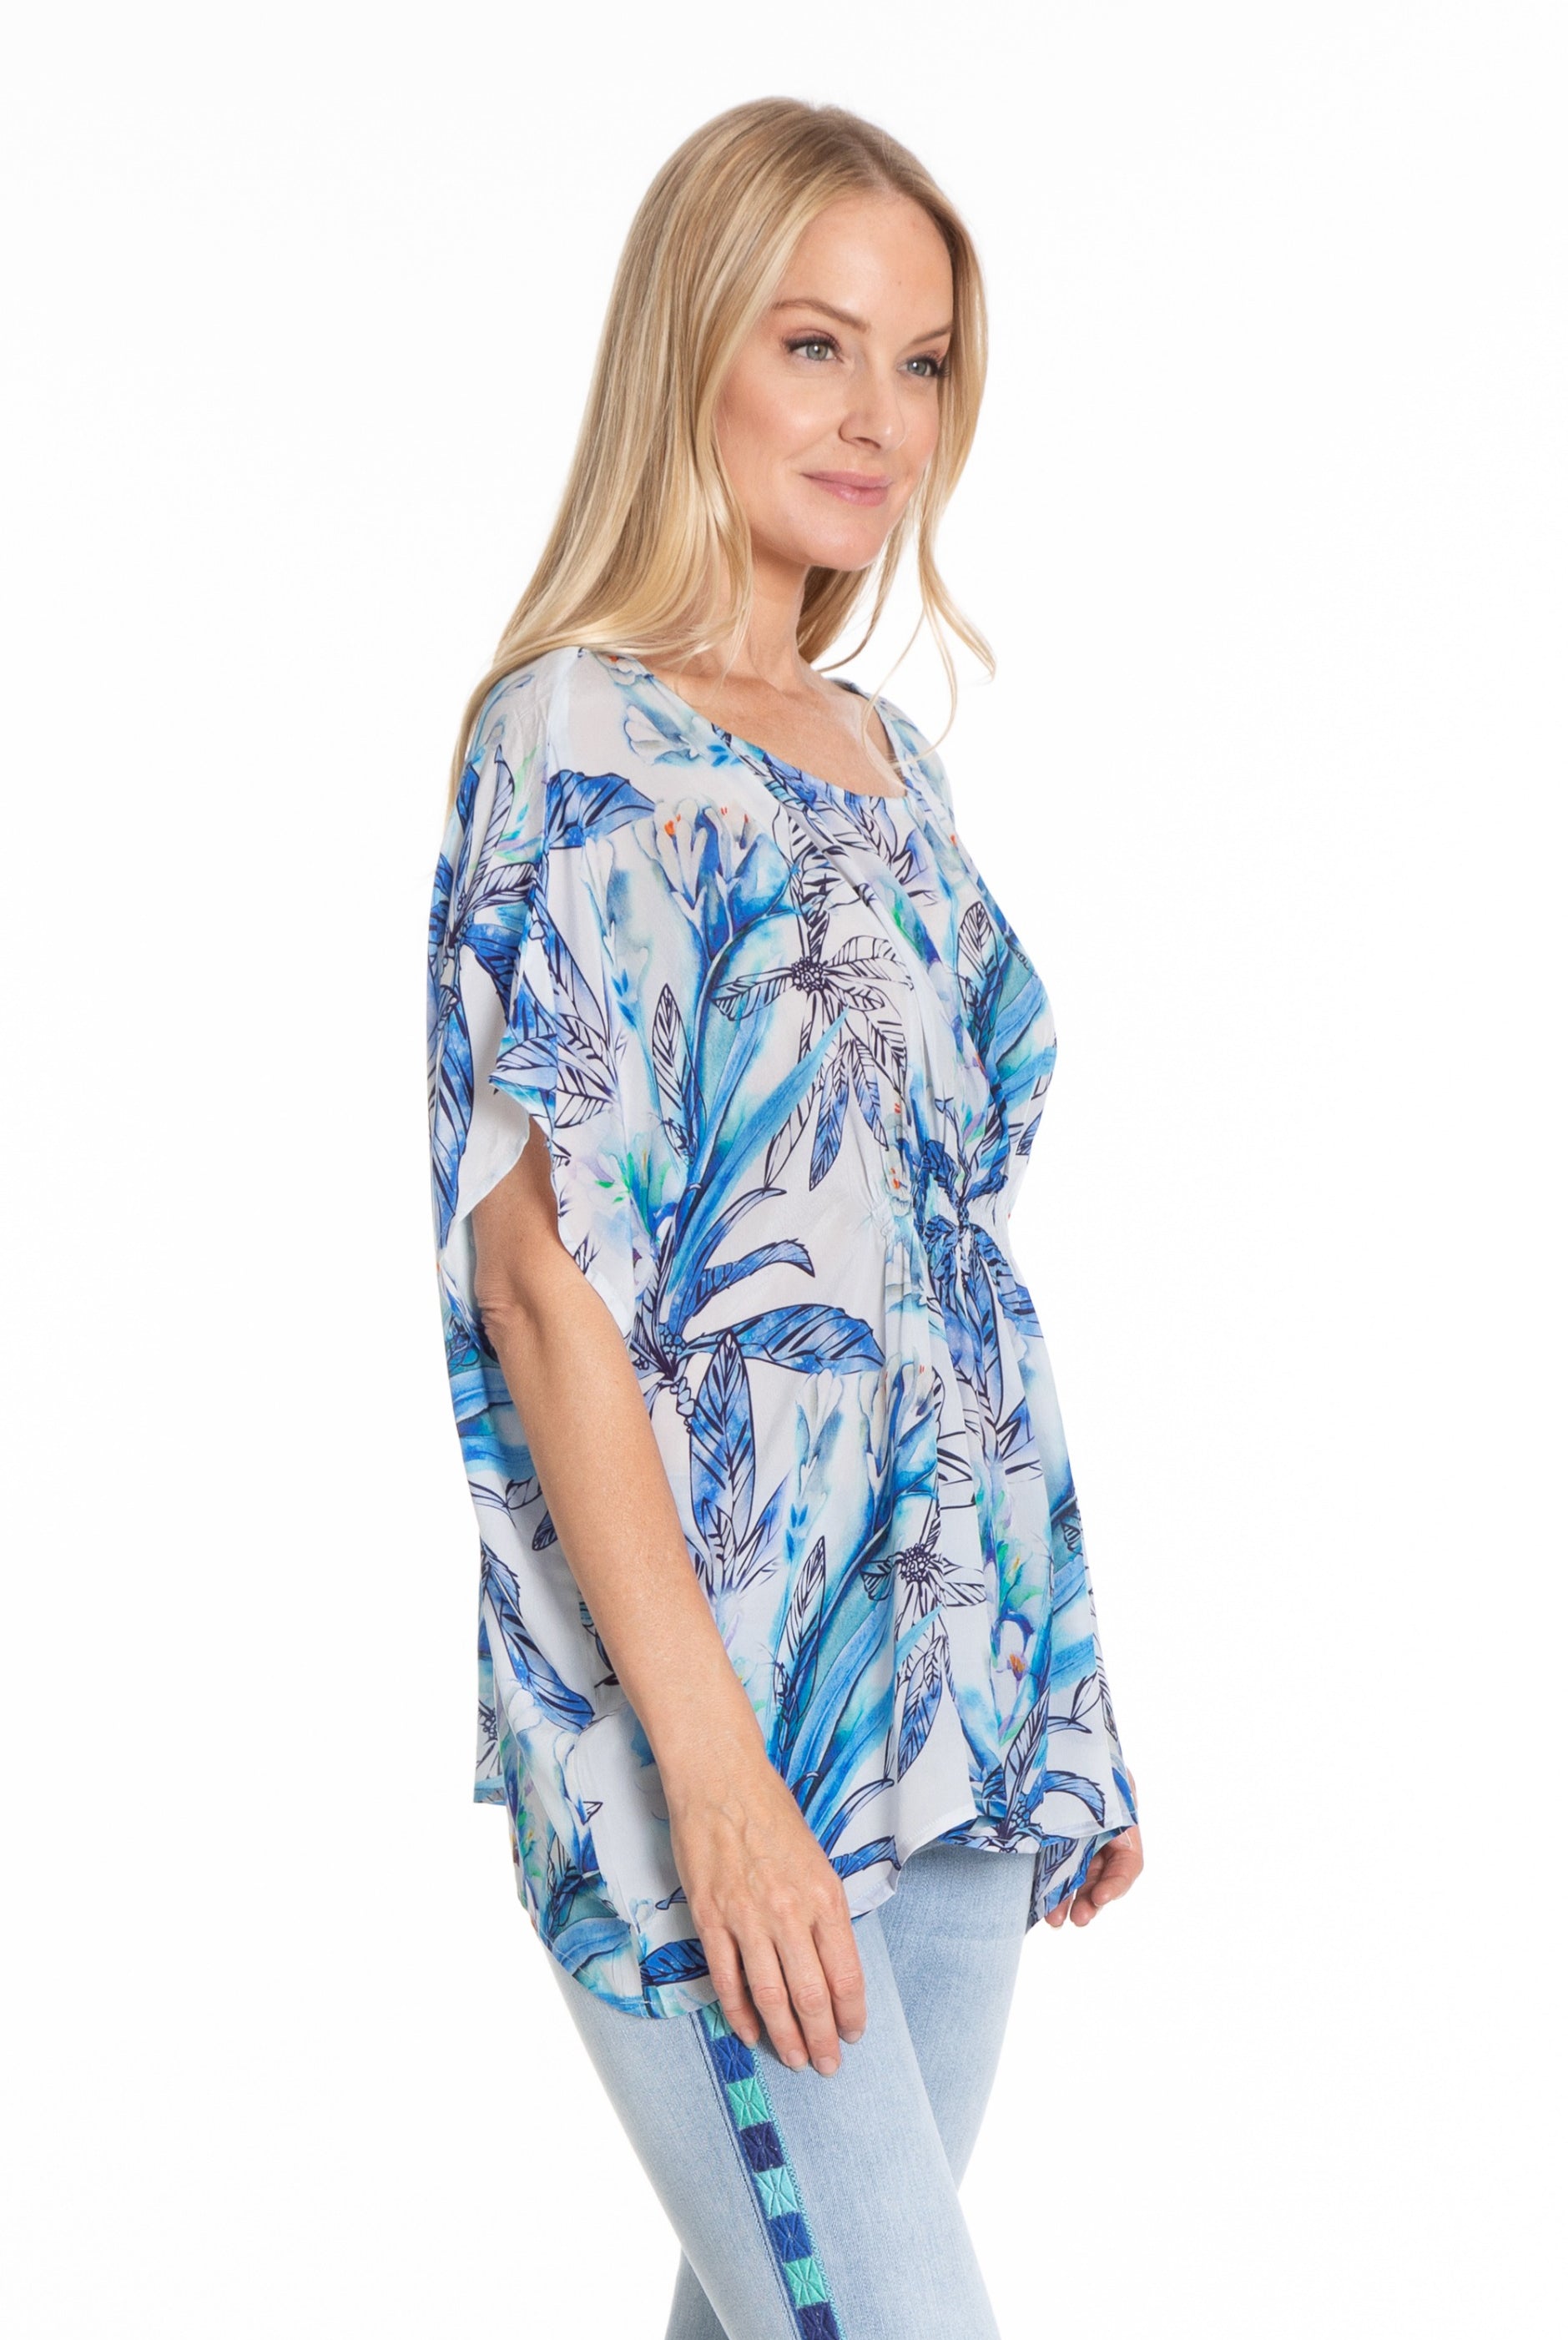 Island Paradise Print - Pullover Poncho with Ruching Top Side-1 APNY